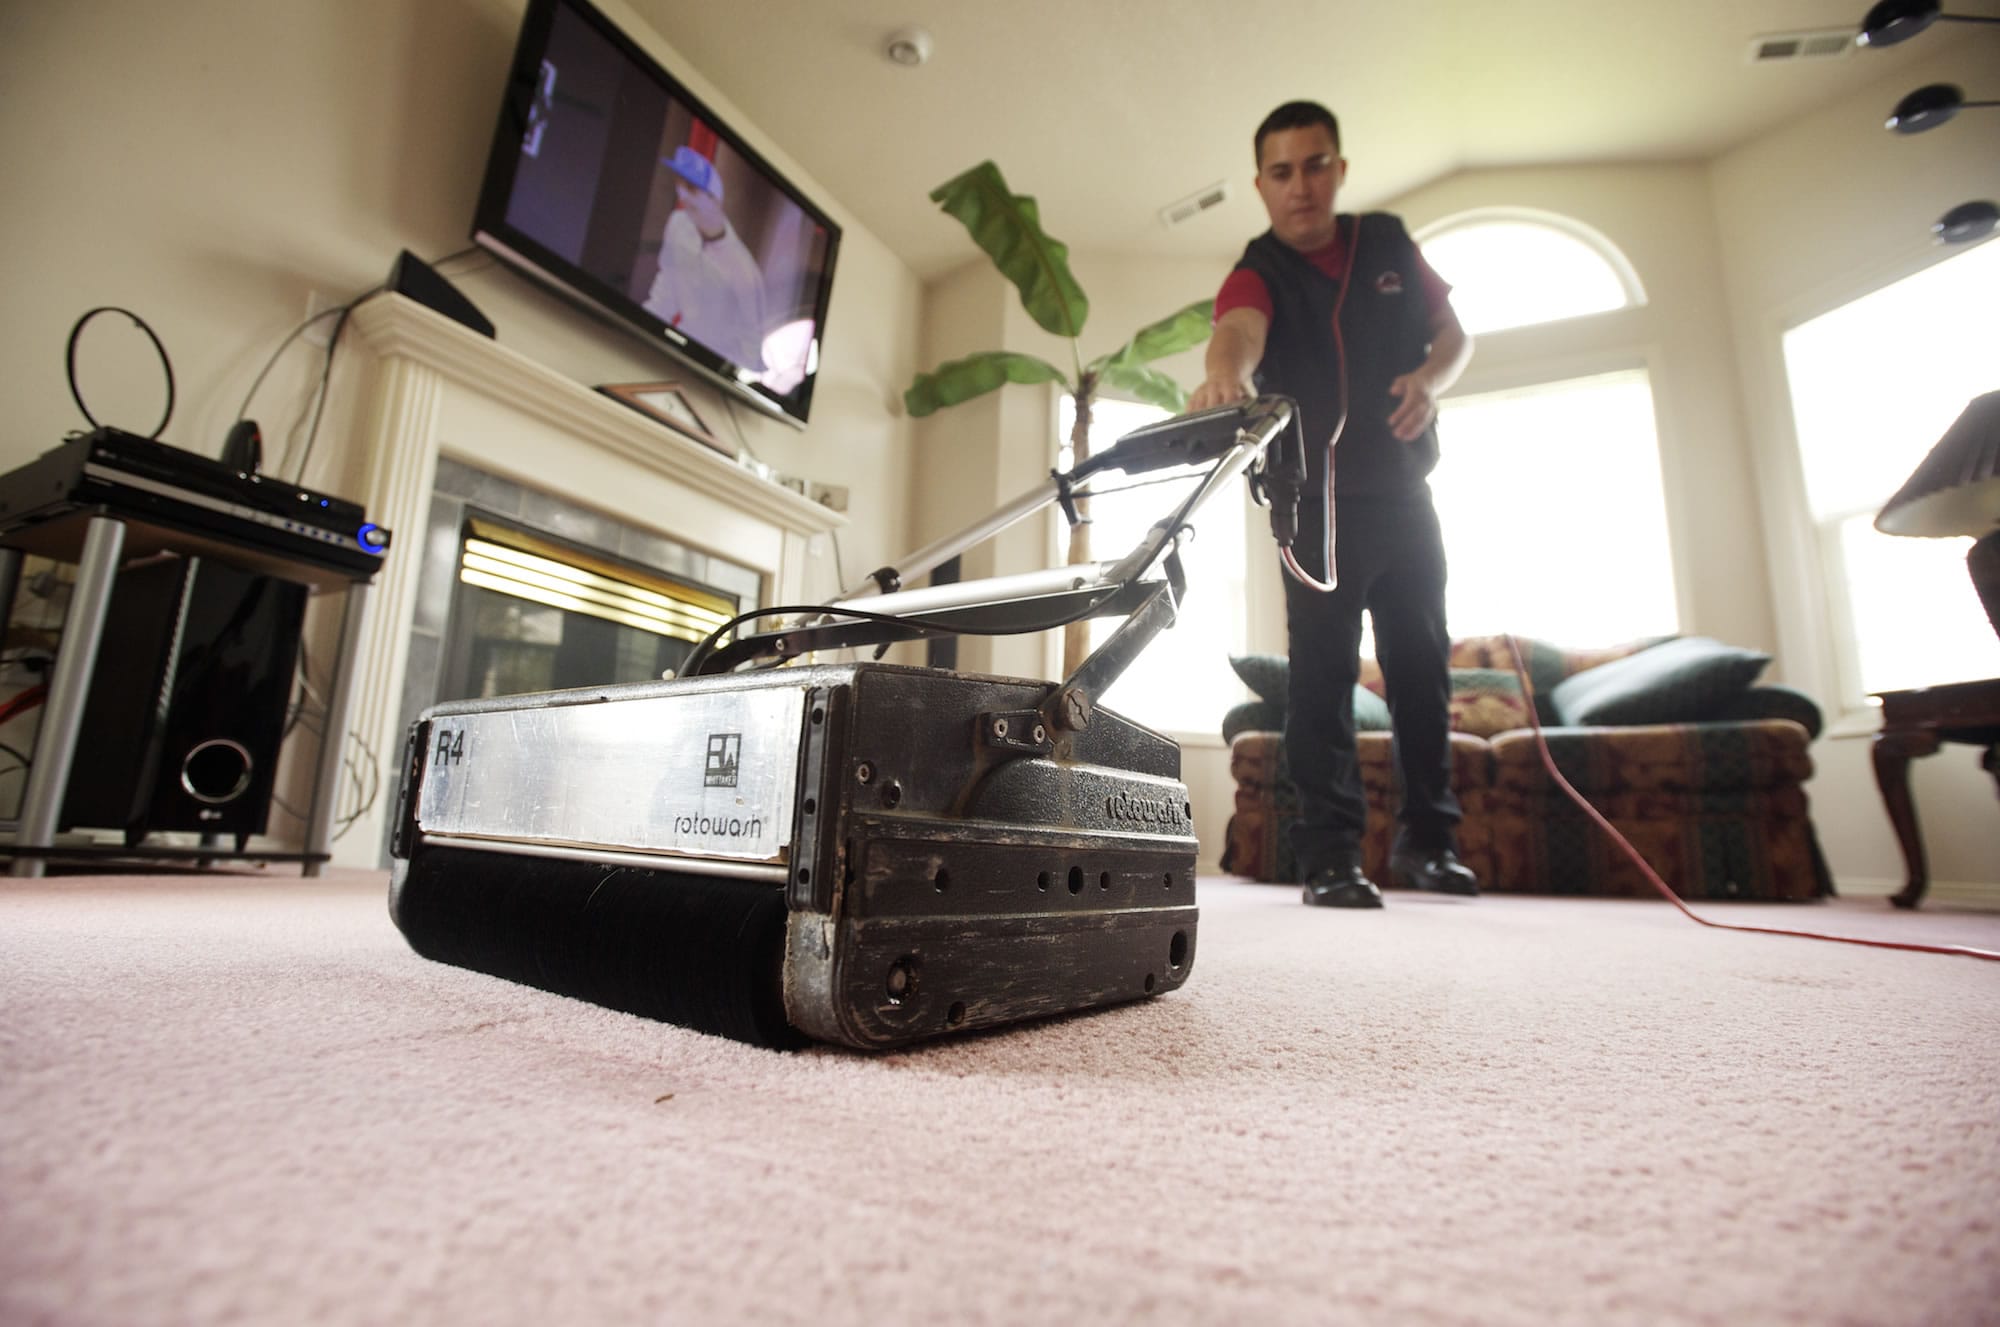 Photos by Steven Lane/The Columbian
Quam's Carpet Cleaning employee Shane Morgan cleans a carpet July 17 at the home of a family friend.